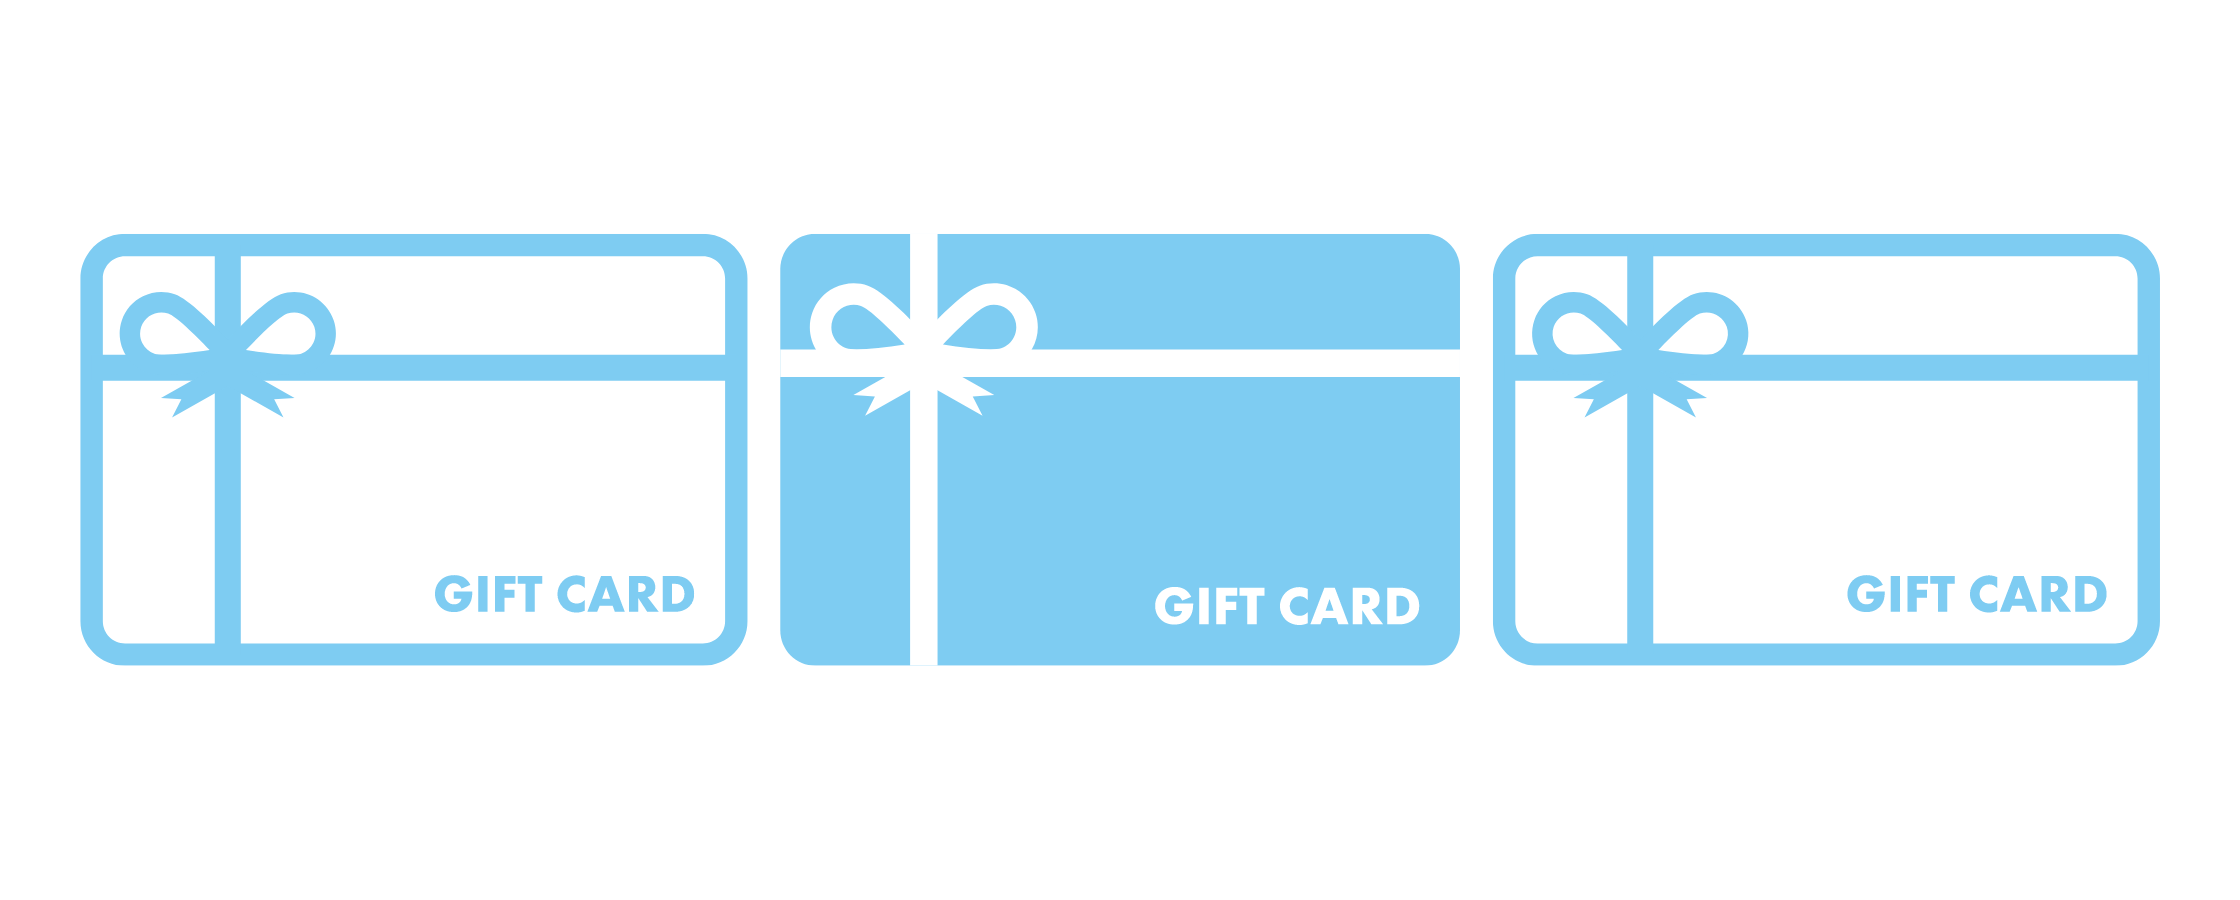 Gift card icon. 